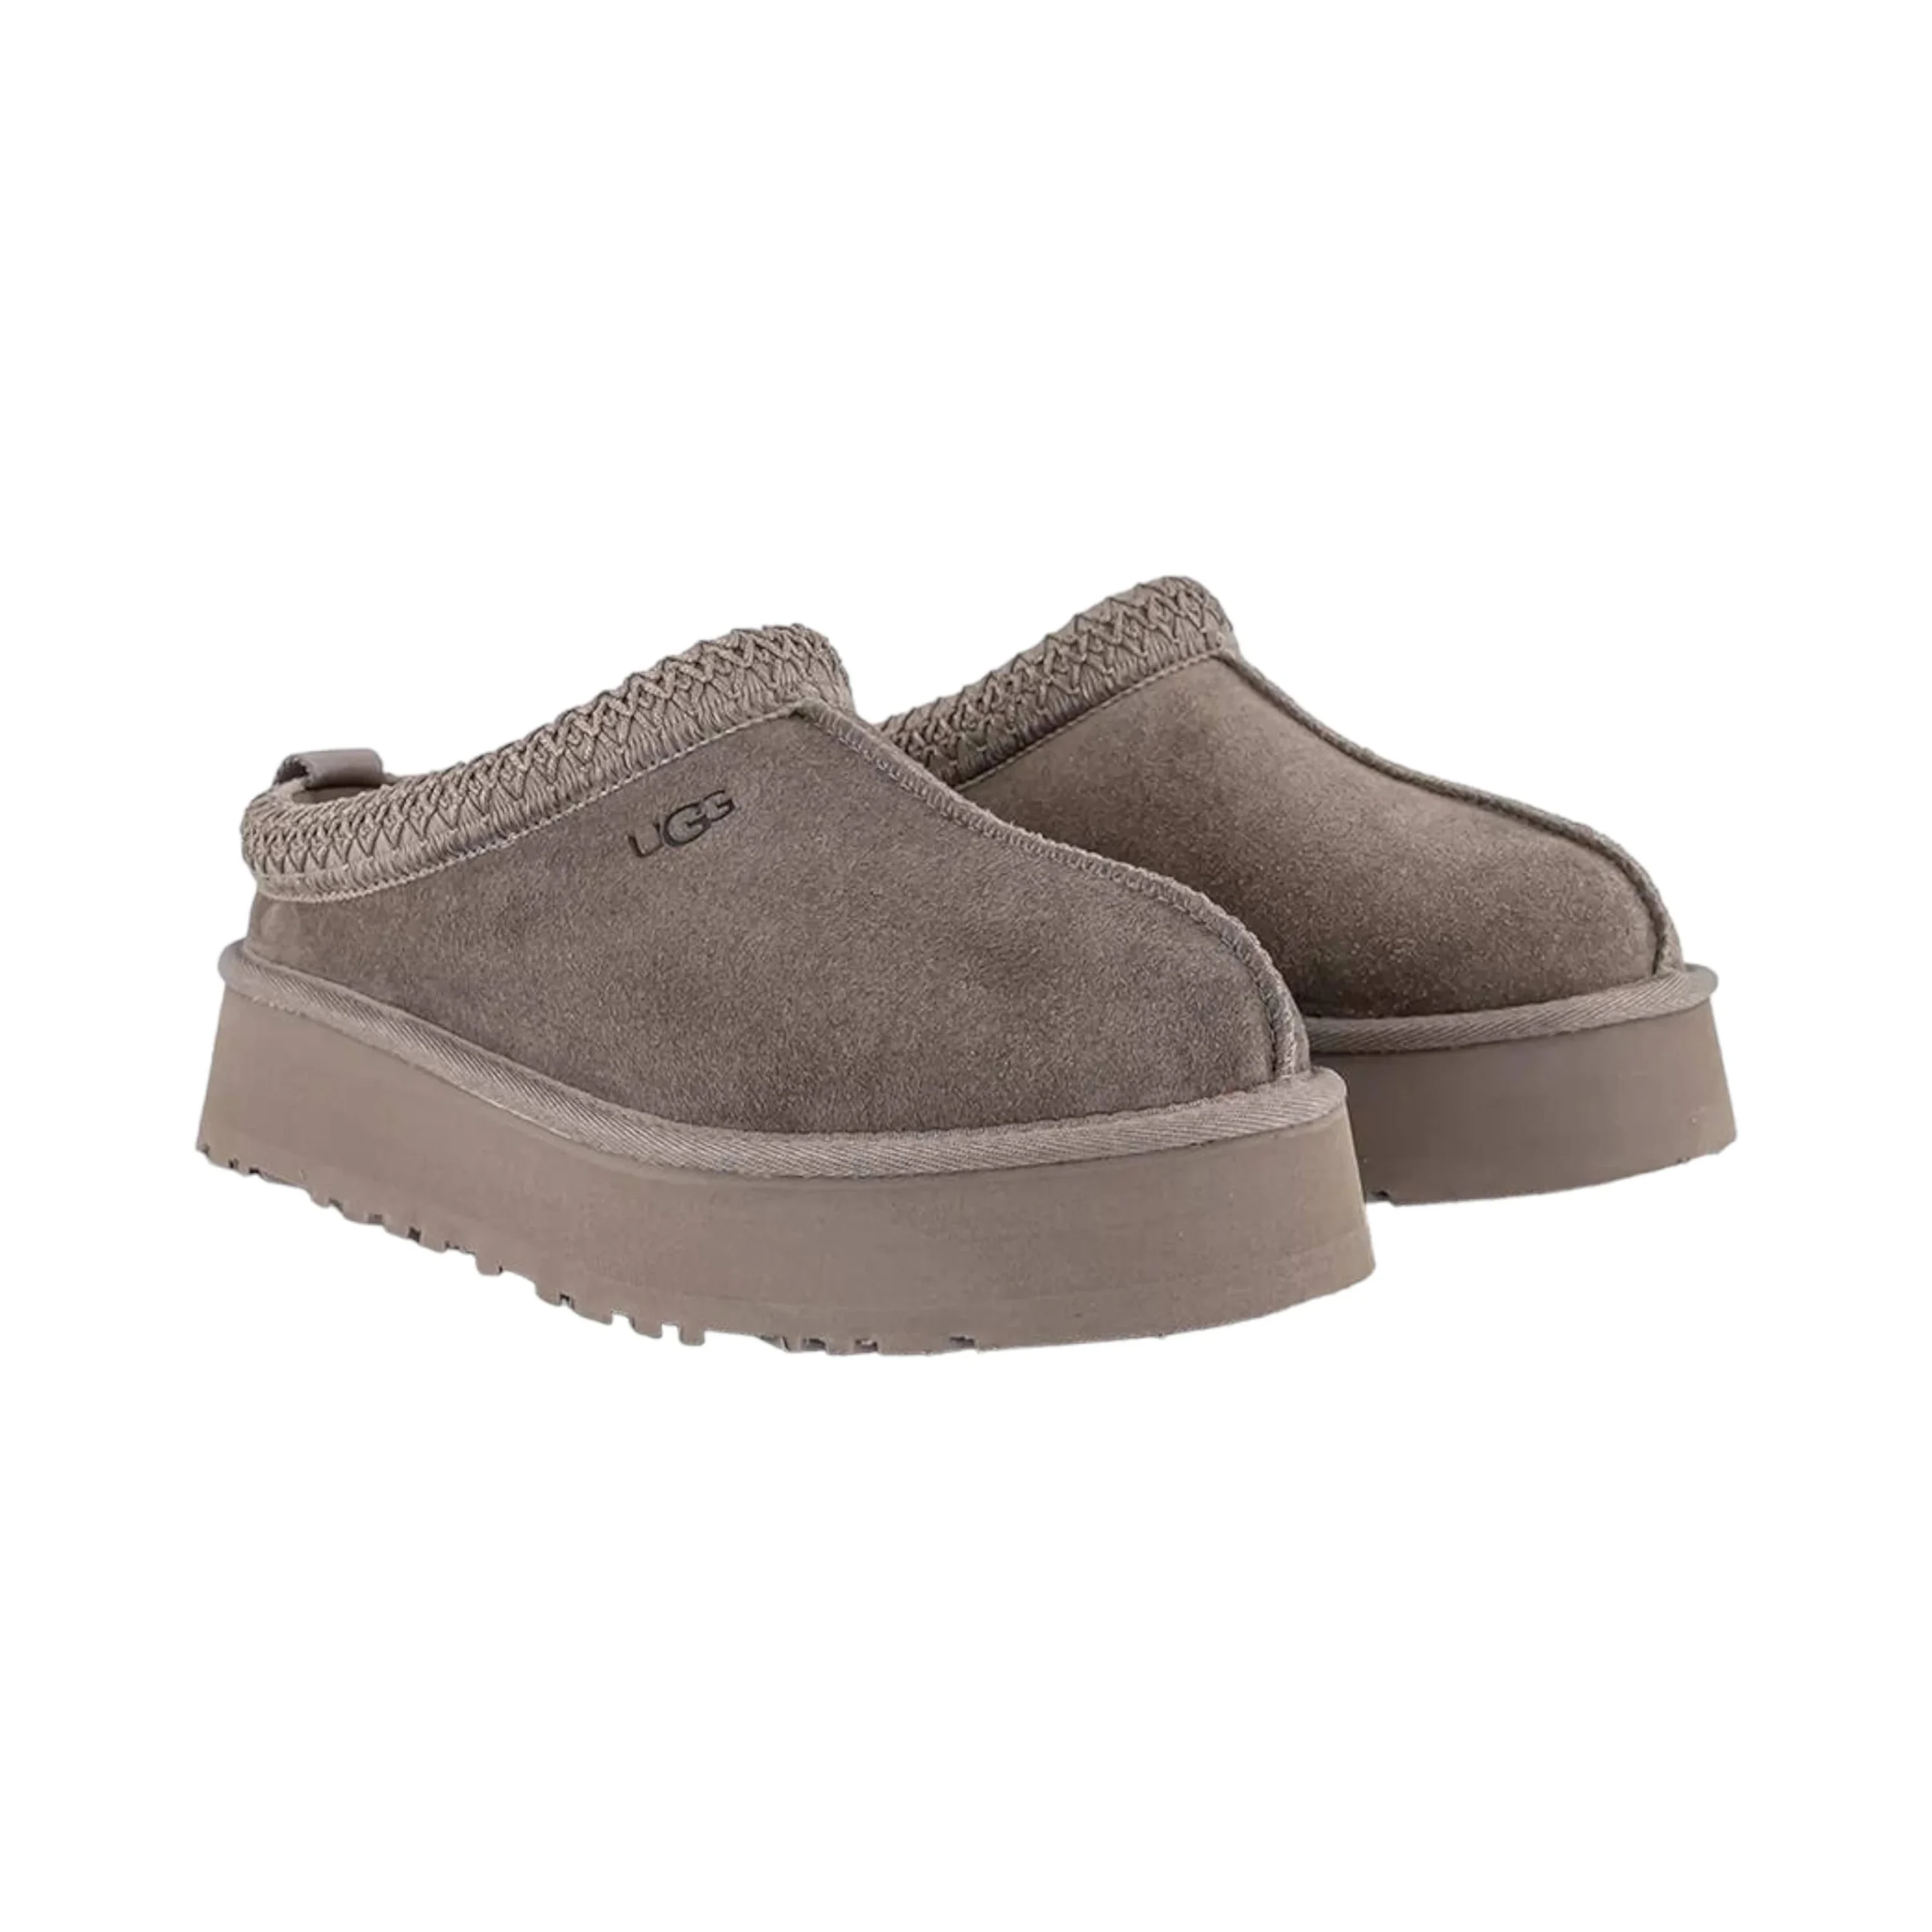 ugg tazz smoked plume - Why are UGG Tazz so popular